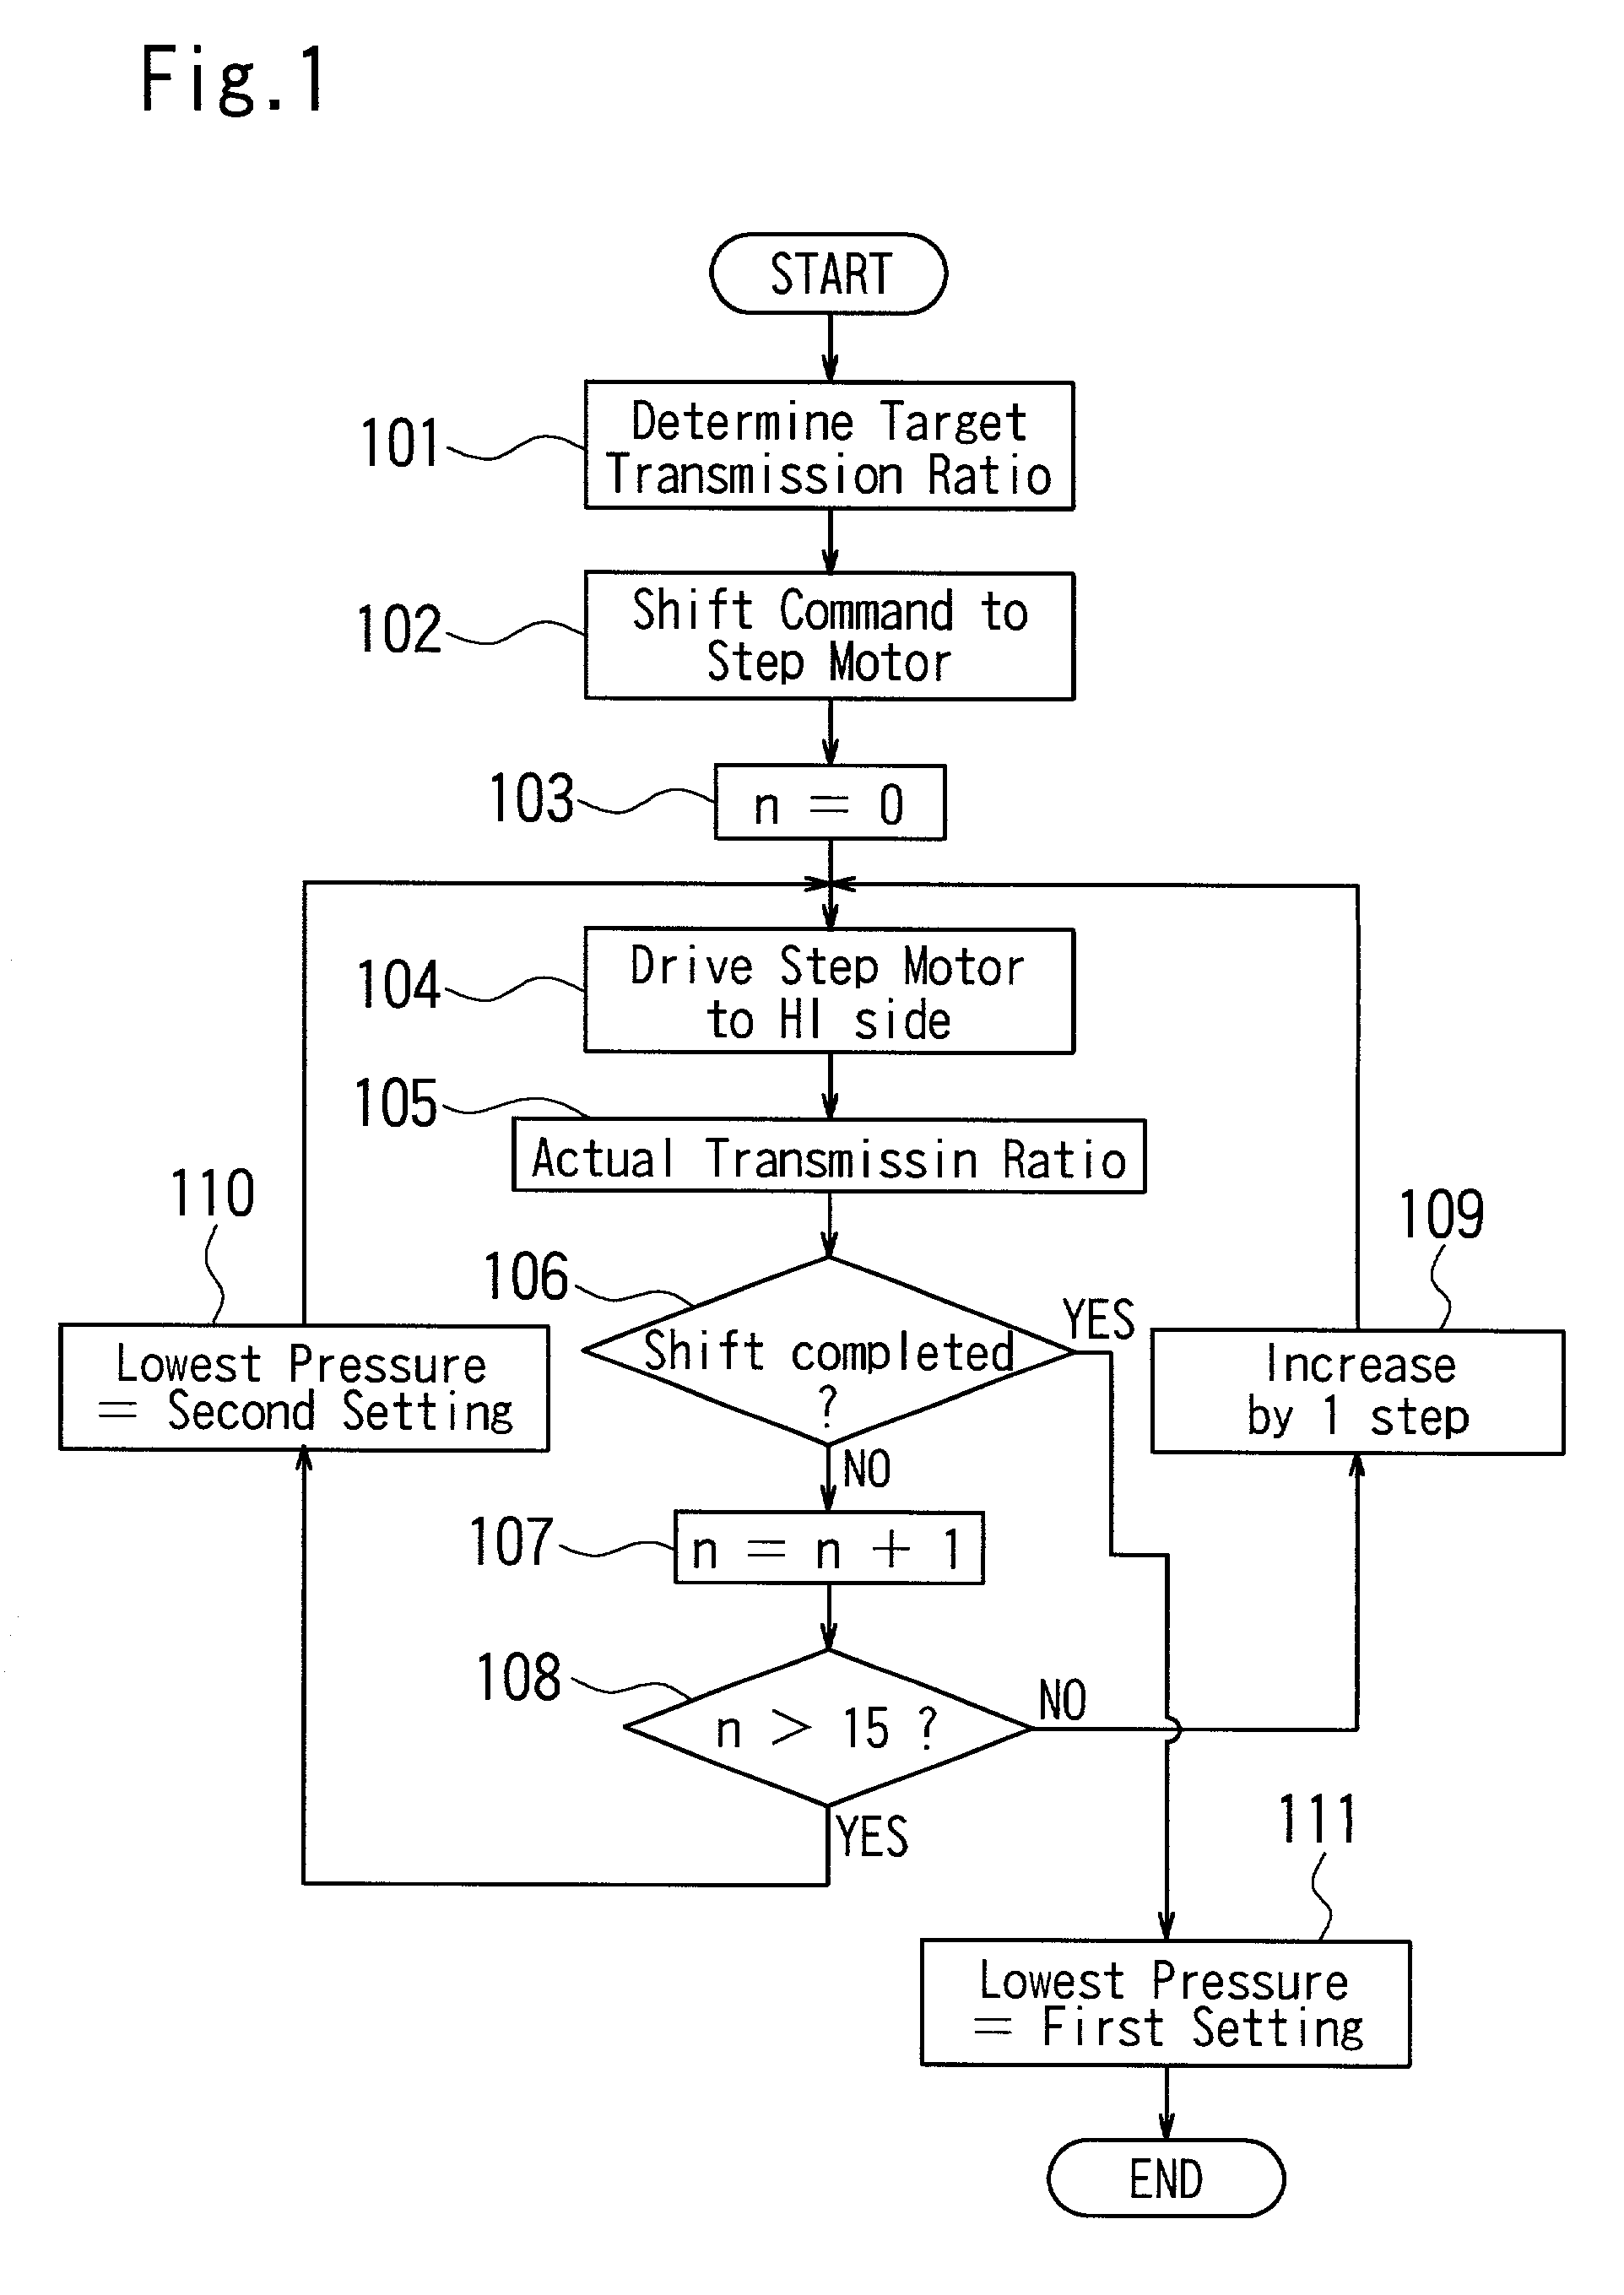 Hydraulic control system for a continuously variable transmission